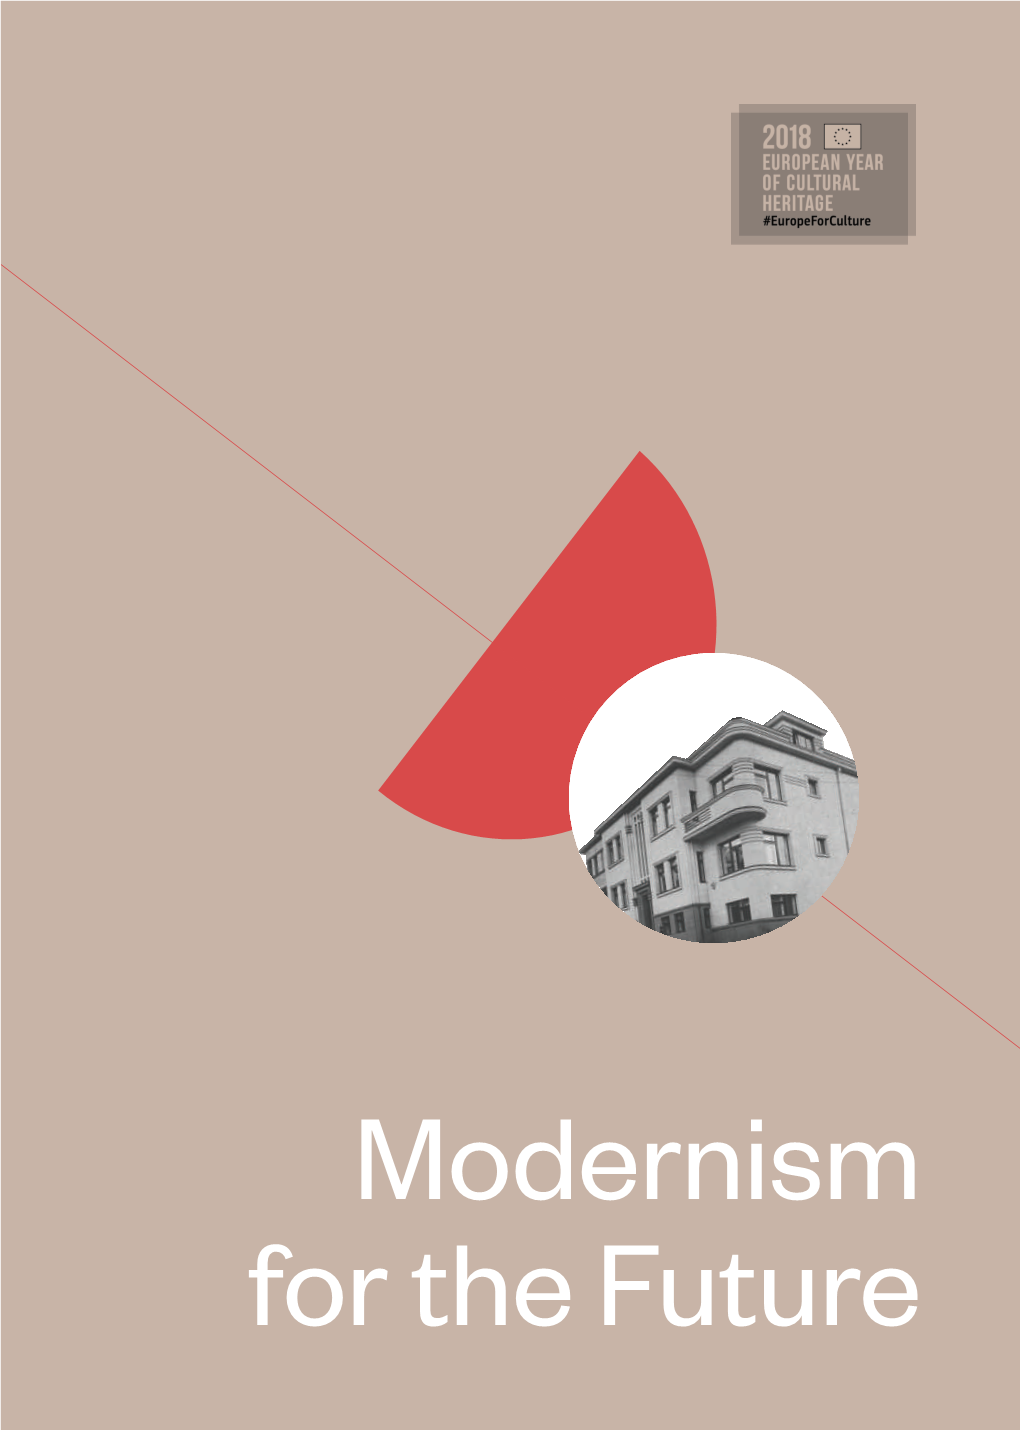 Modernism for the Future